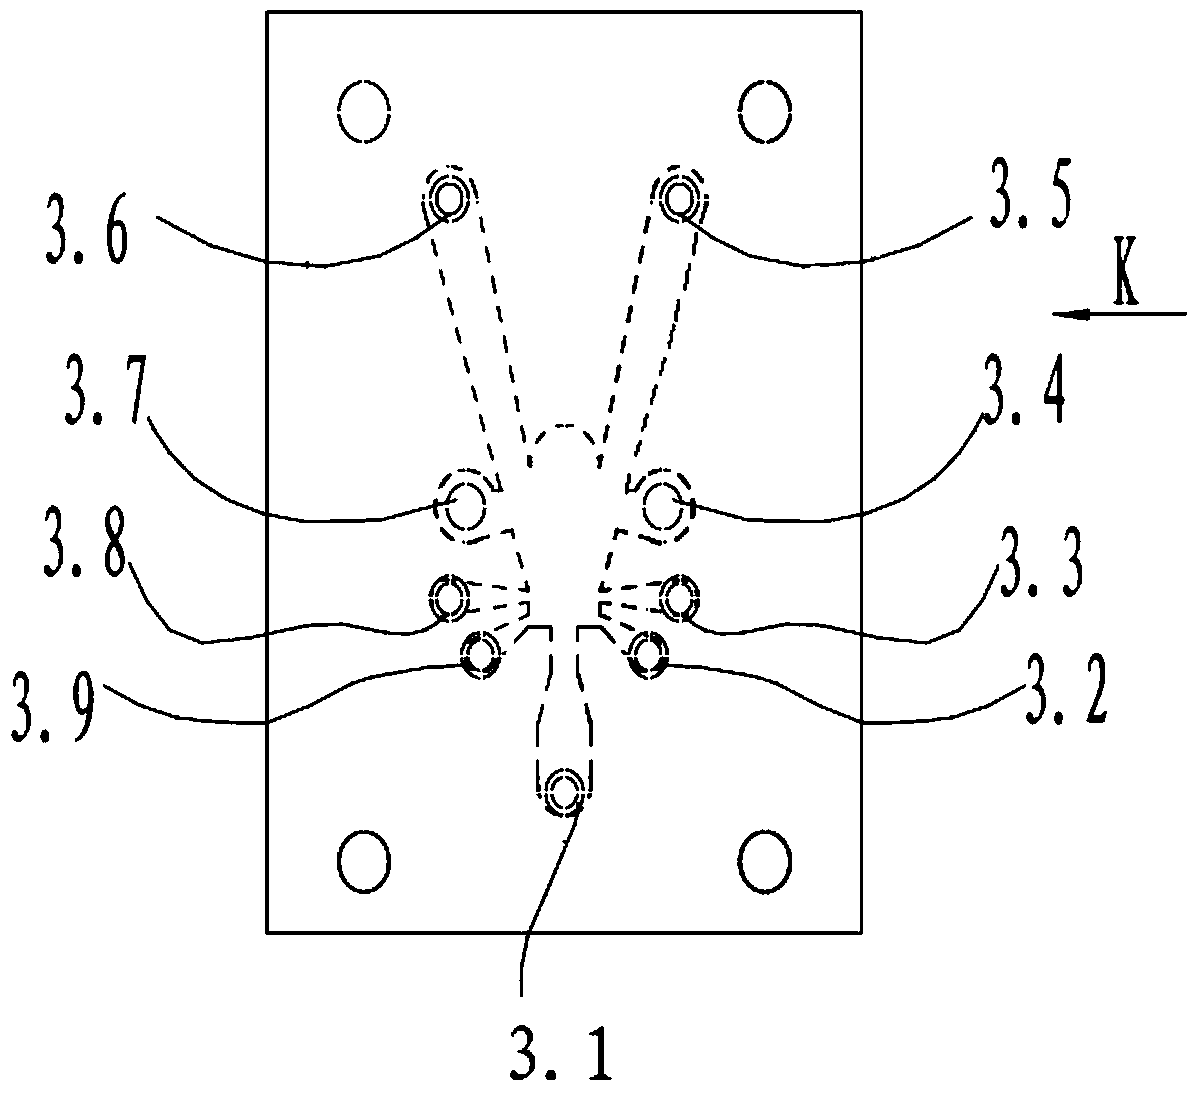 A Bistable Controller for Pneumatic Beam